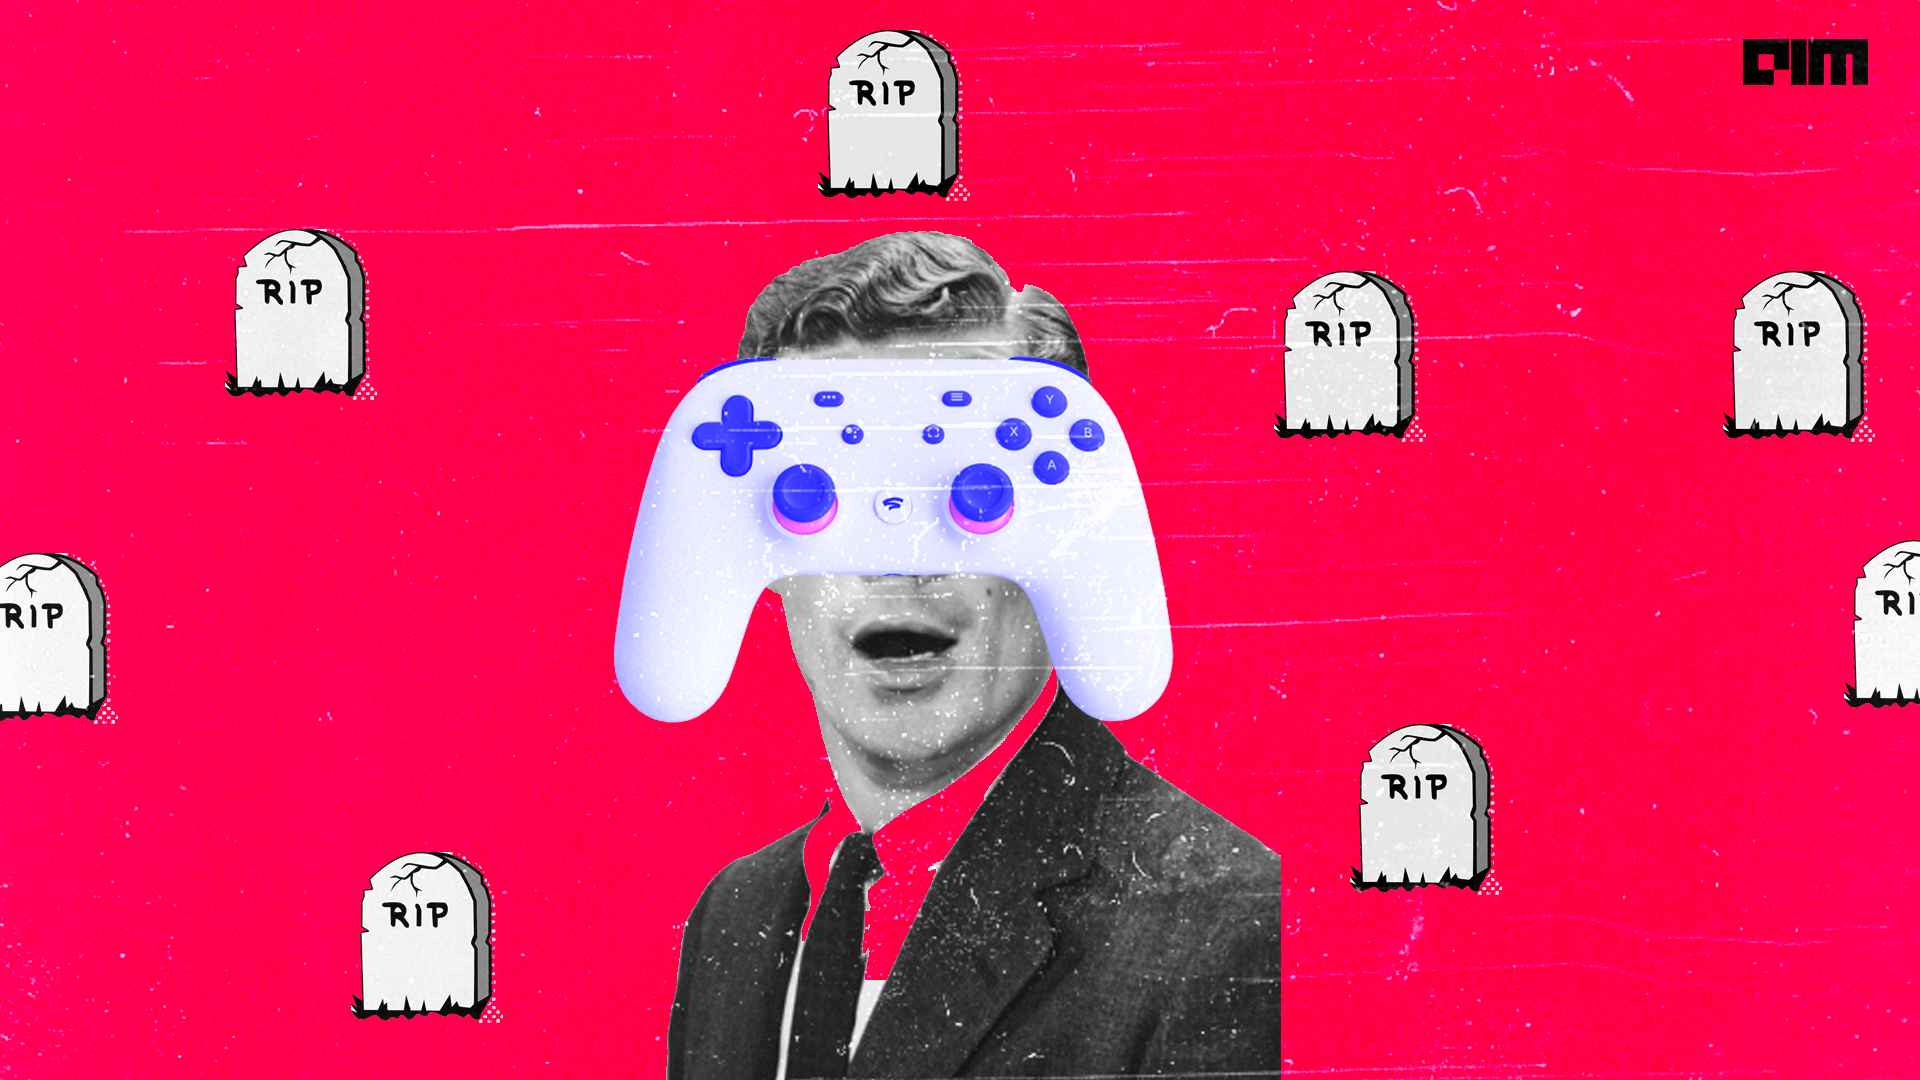 RIP Google Stadia: What went wrong?